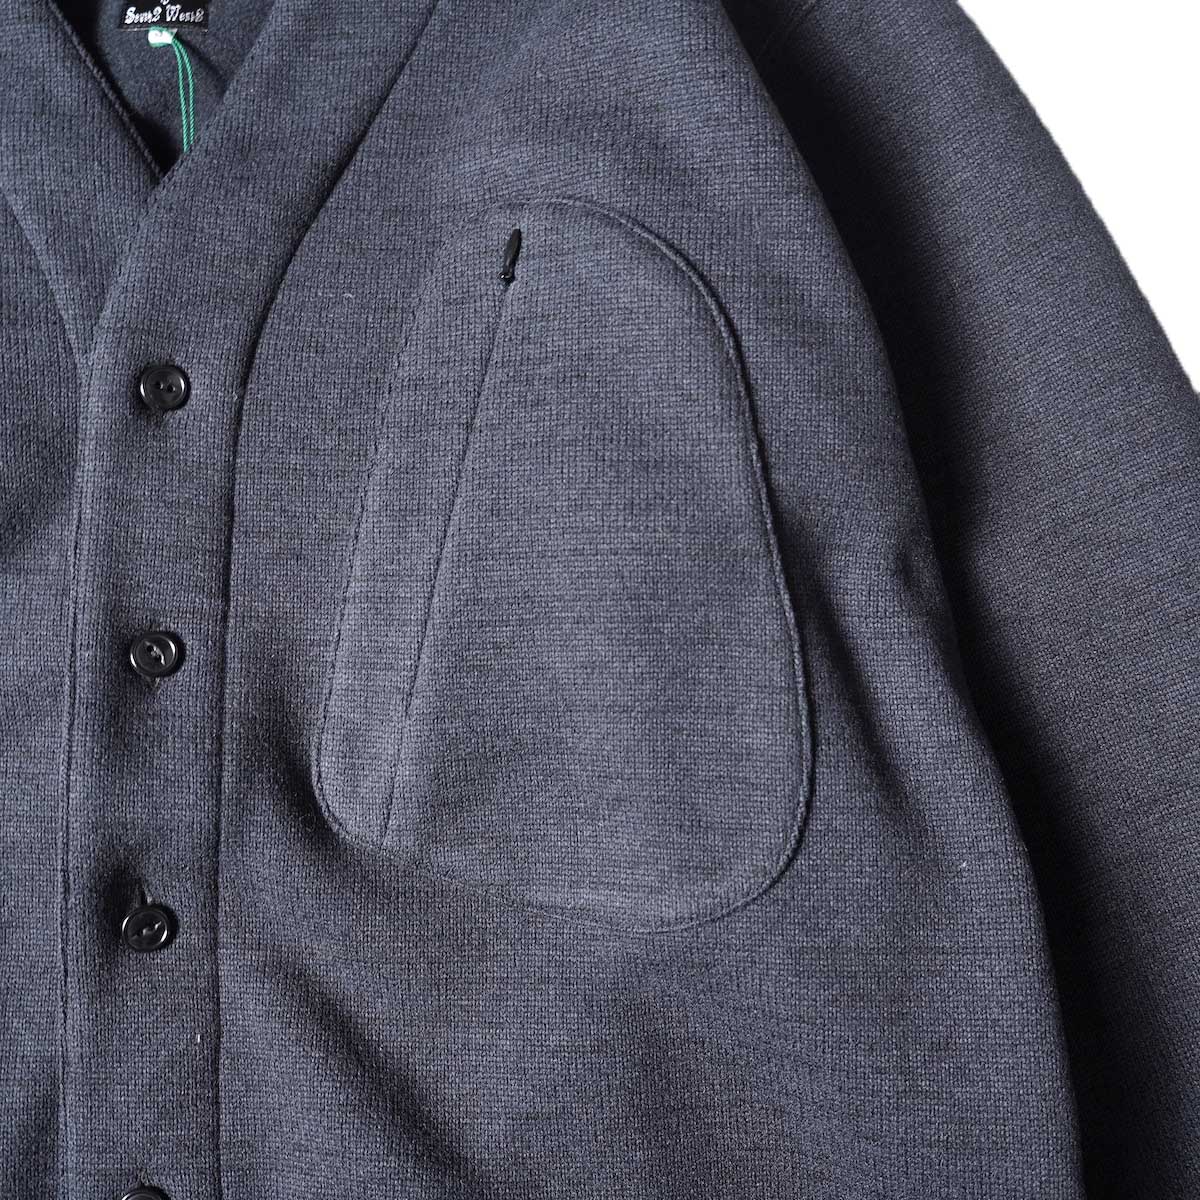 South2 West8 / Scouting Shirt - POLARTEC Fleece Lined Jersey (Black)ポケット